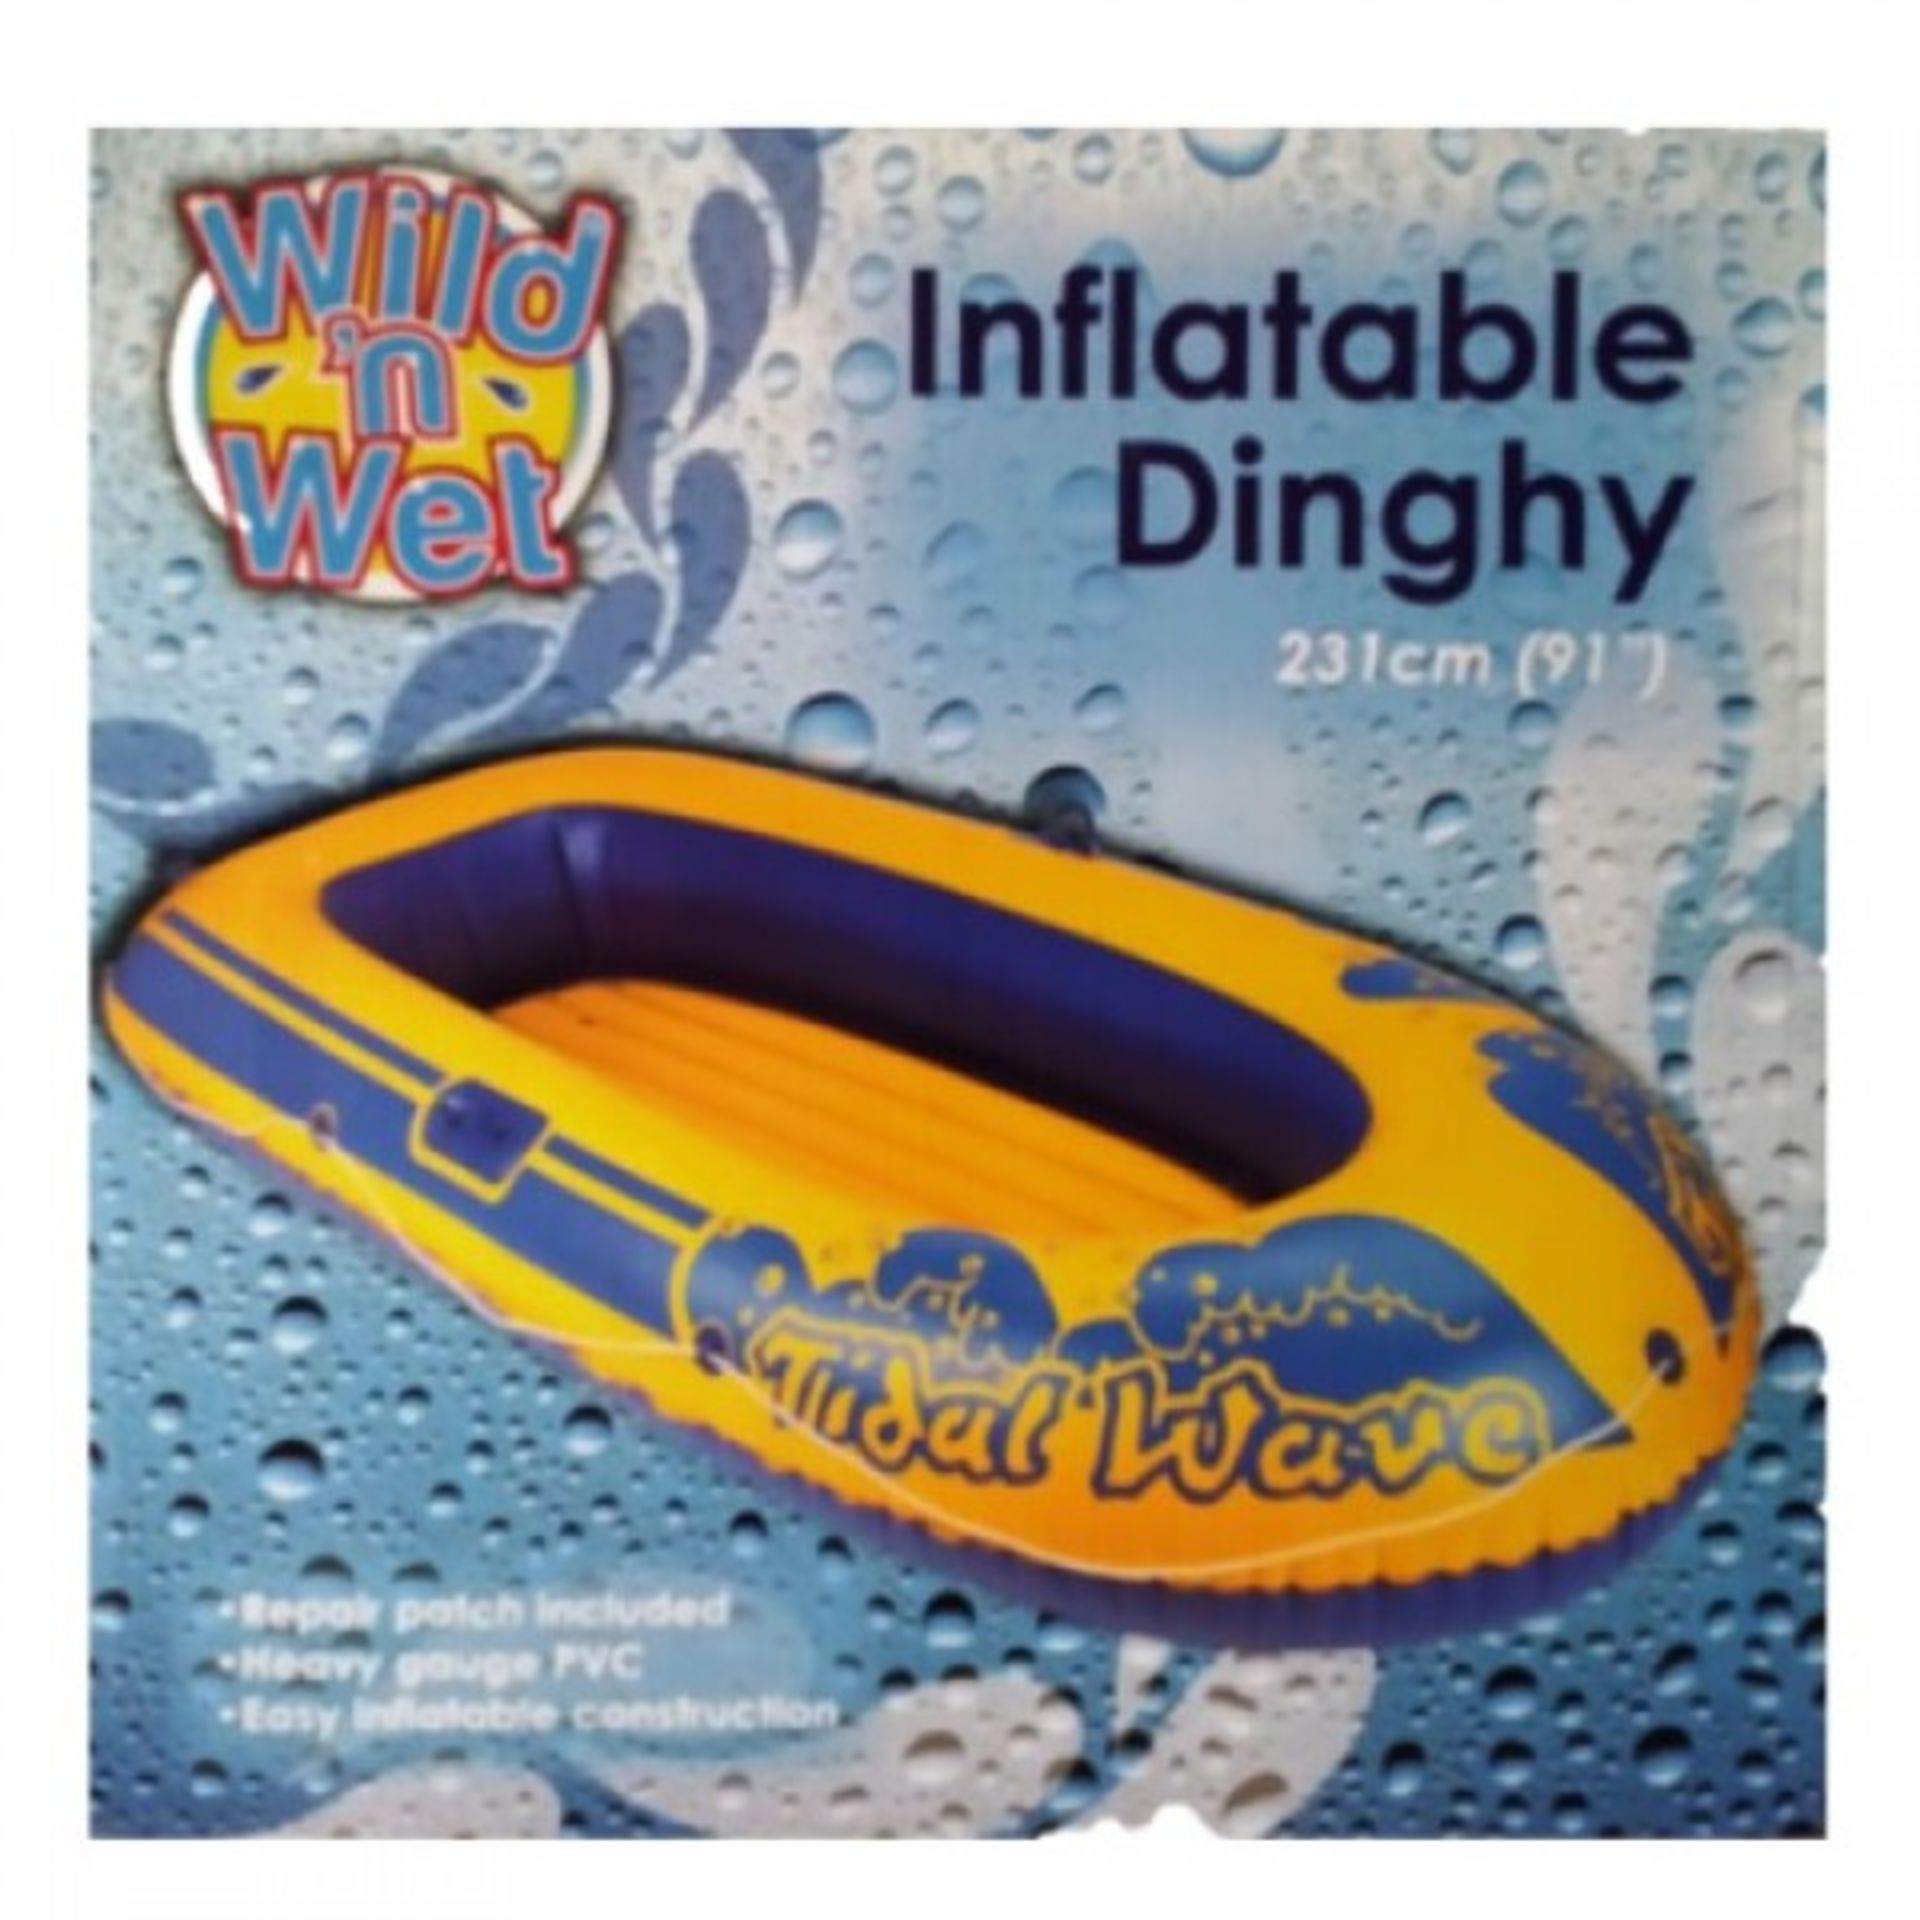 V Brand New 91" (231 cm) 3 Person Inflatable Dinghy Made from Heavy Gauge PVC - Easy Inflate - - Image 4 of 4